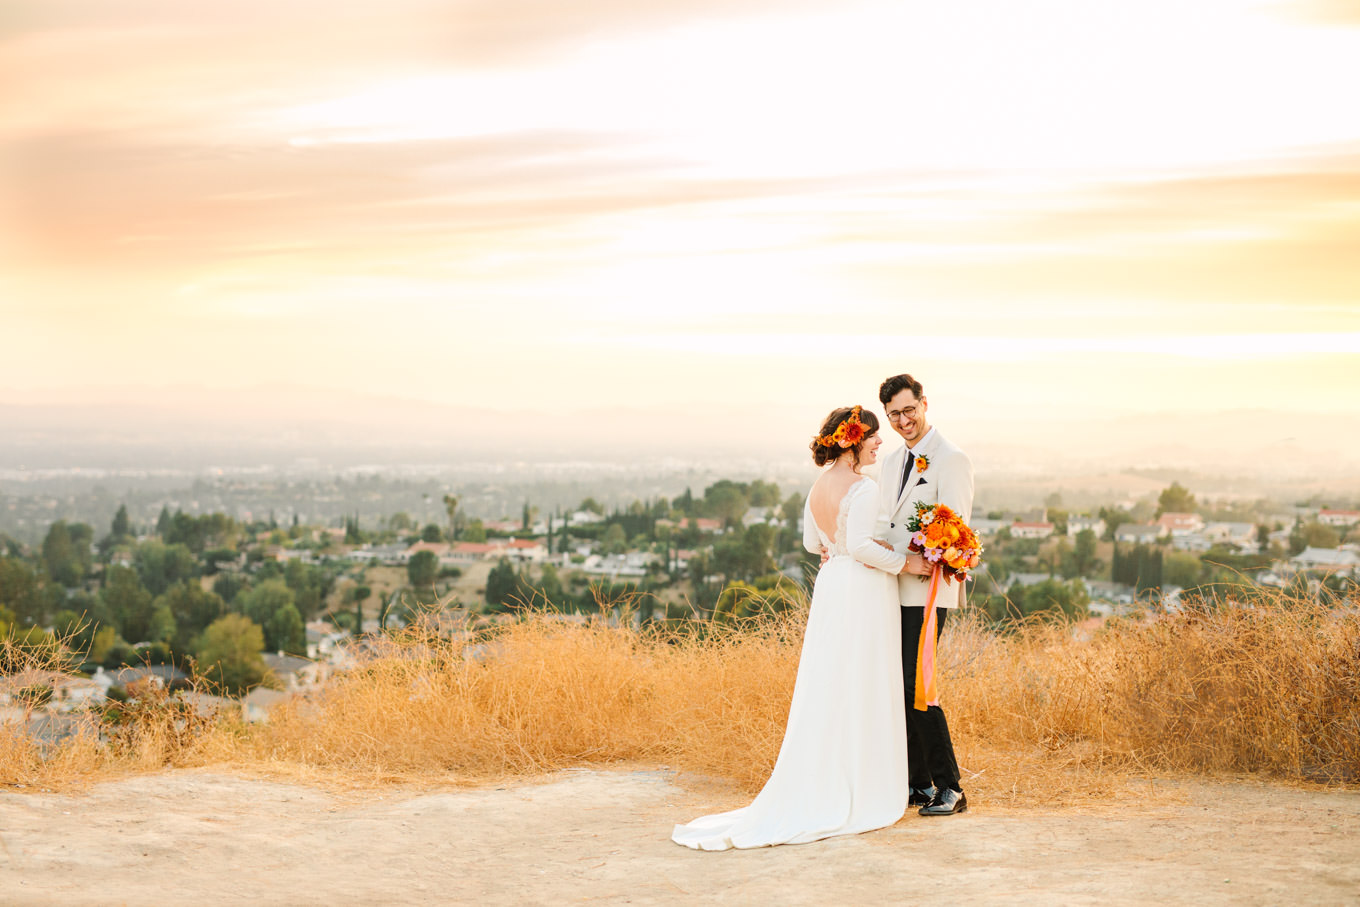 Bride and groom with striking outdoor backdrop | Vibrant backyard micro wedding featured on Green Wedding Shoes | Colorful LA wedding photography | #losangeleswedding #backyardwedding #microwedding #laweddingphotographer Source: Mary Costa Photography | Los Angeles